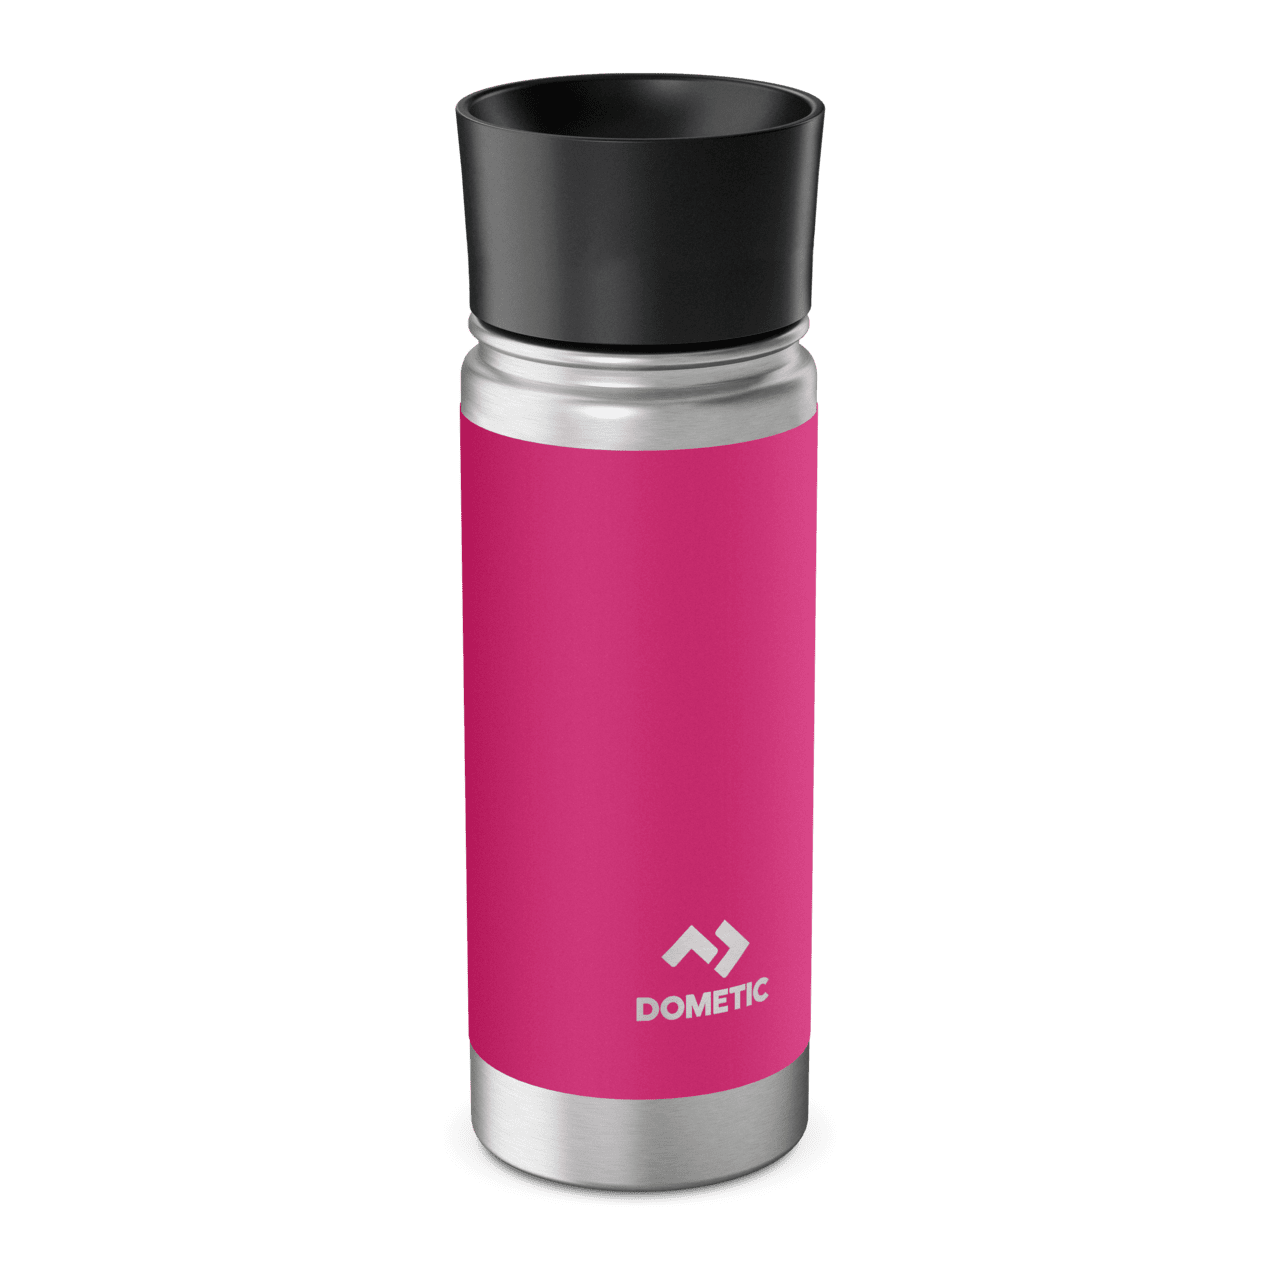 Dometic - Dometic Thermo Bottle 50 - Orchid